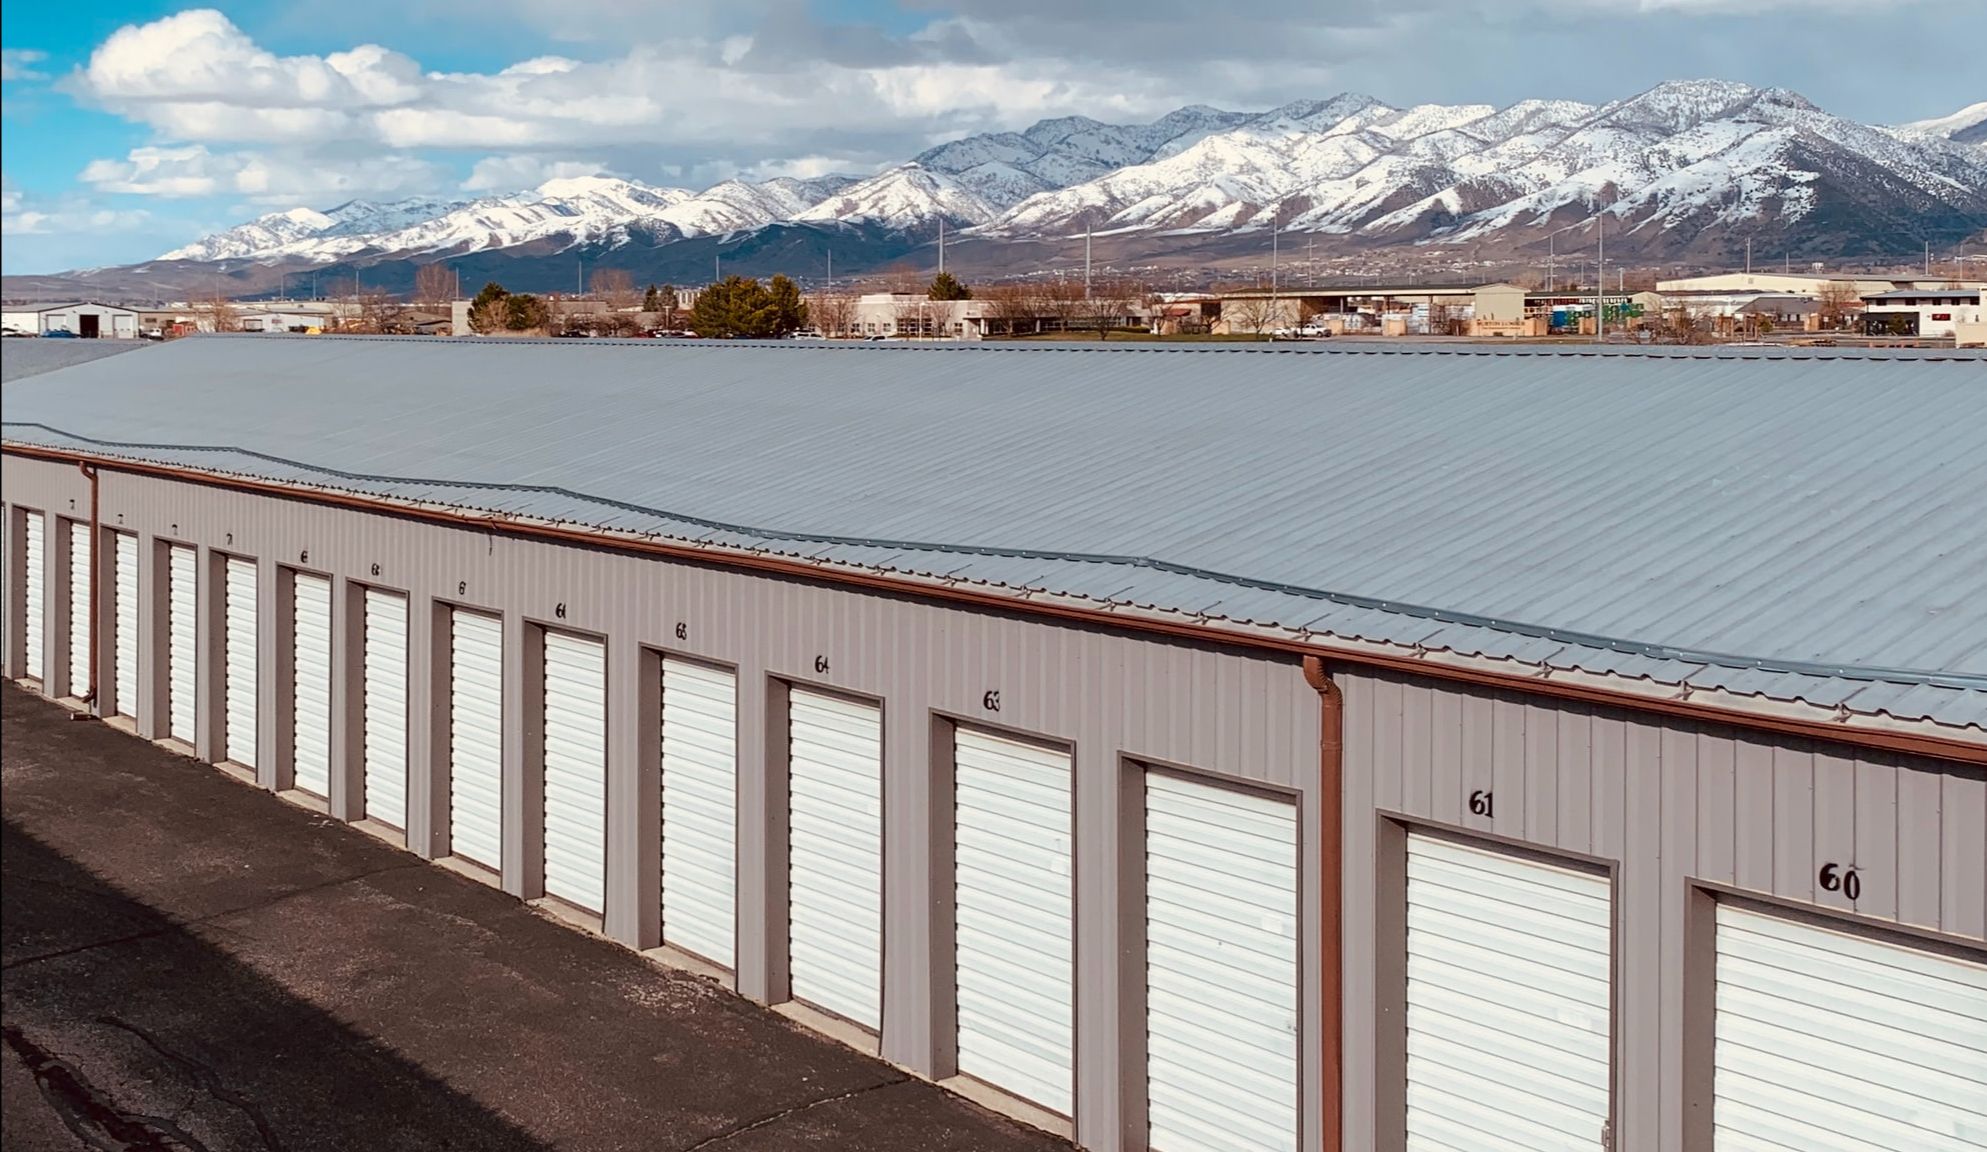 A row of storage units with snowy mountains in the background